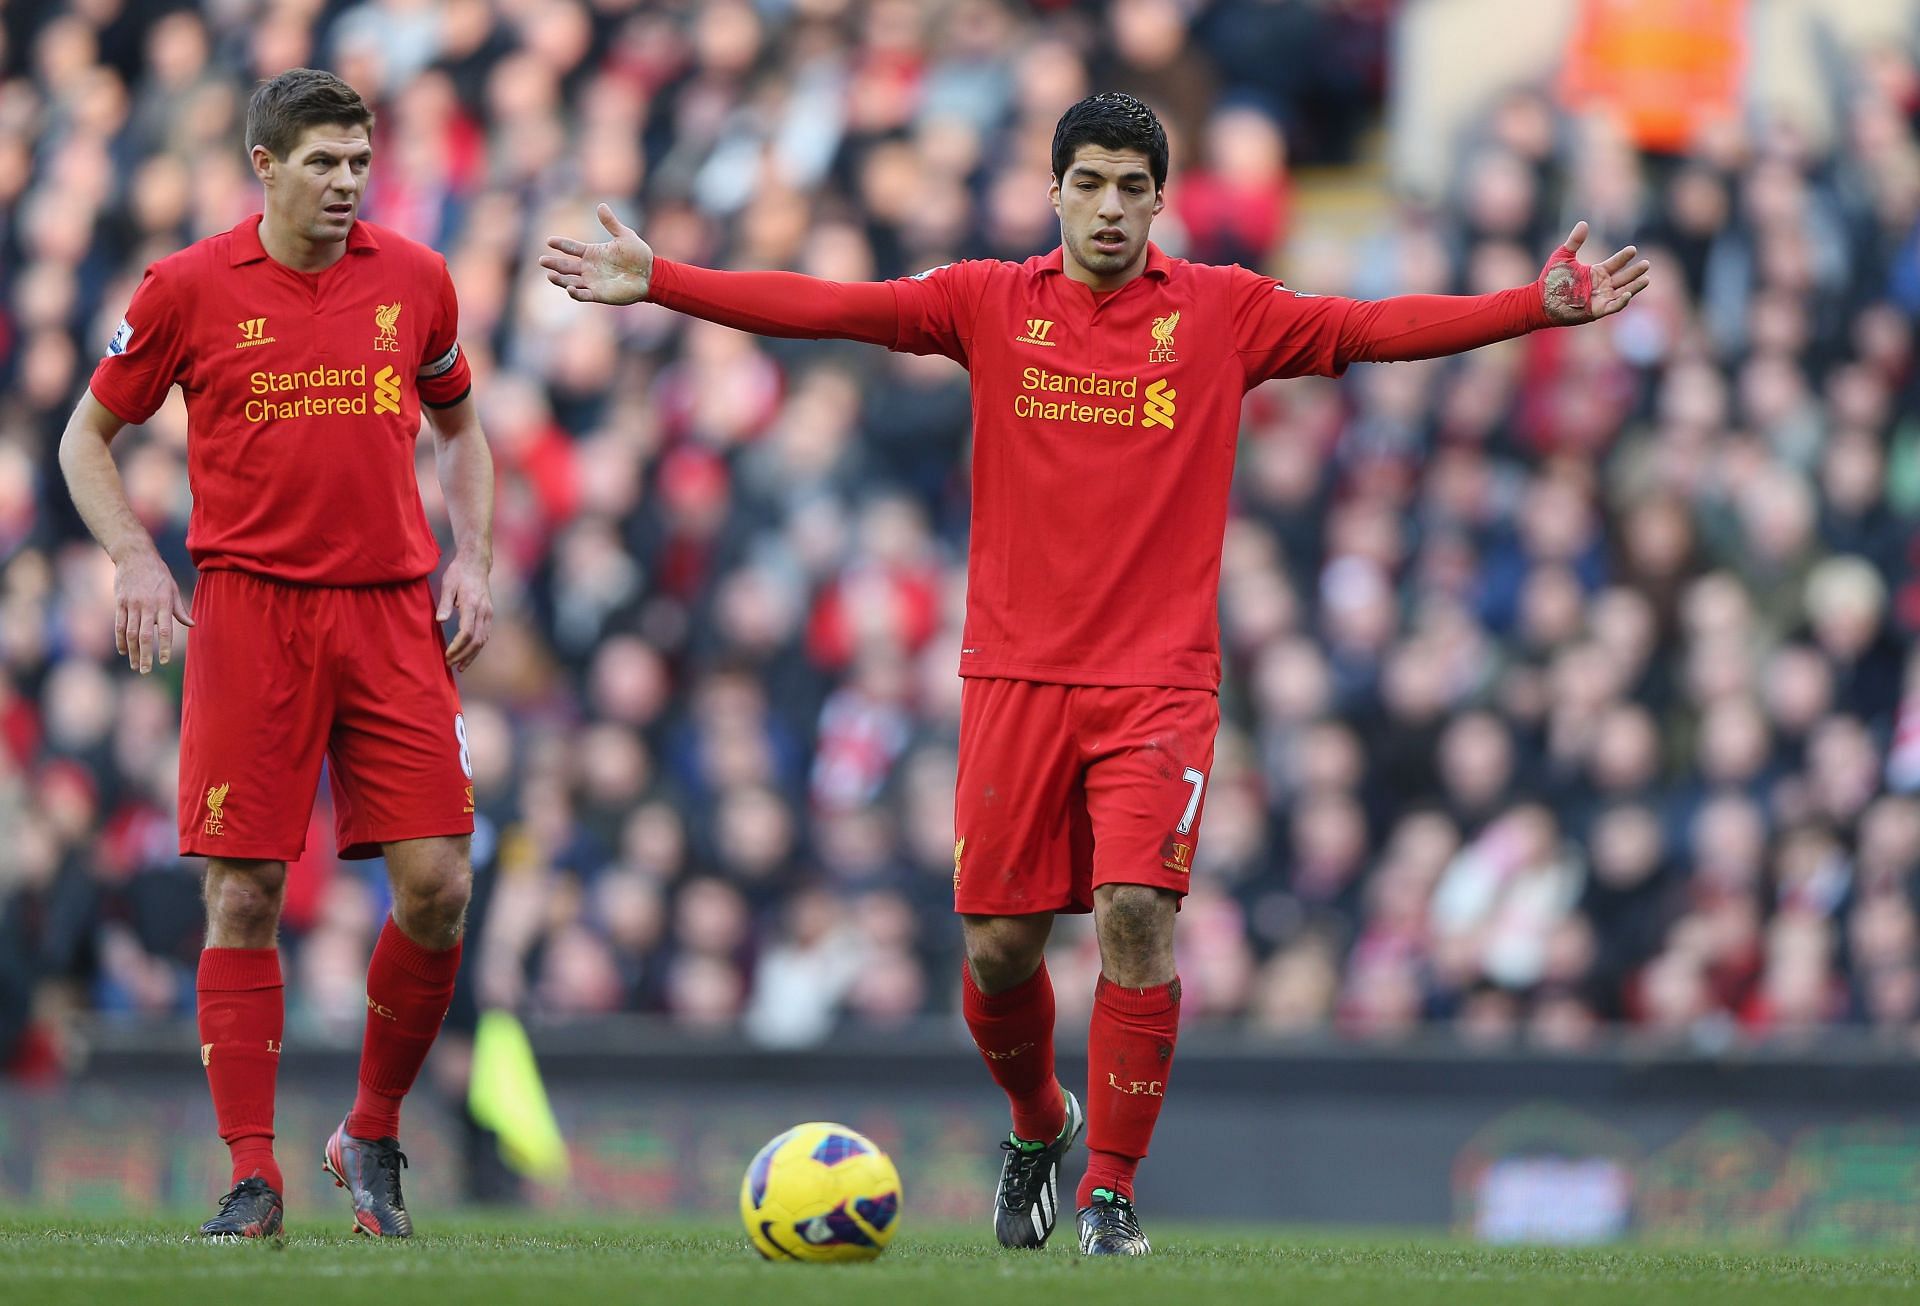 Steven Gerrard and Luis Suarez excelled alongside one another. 